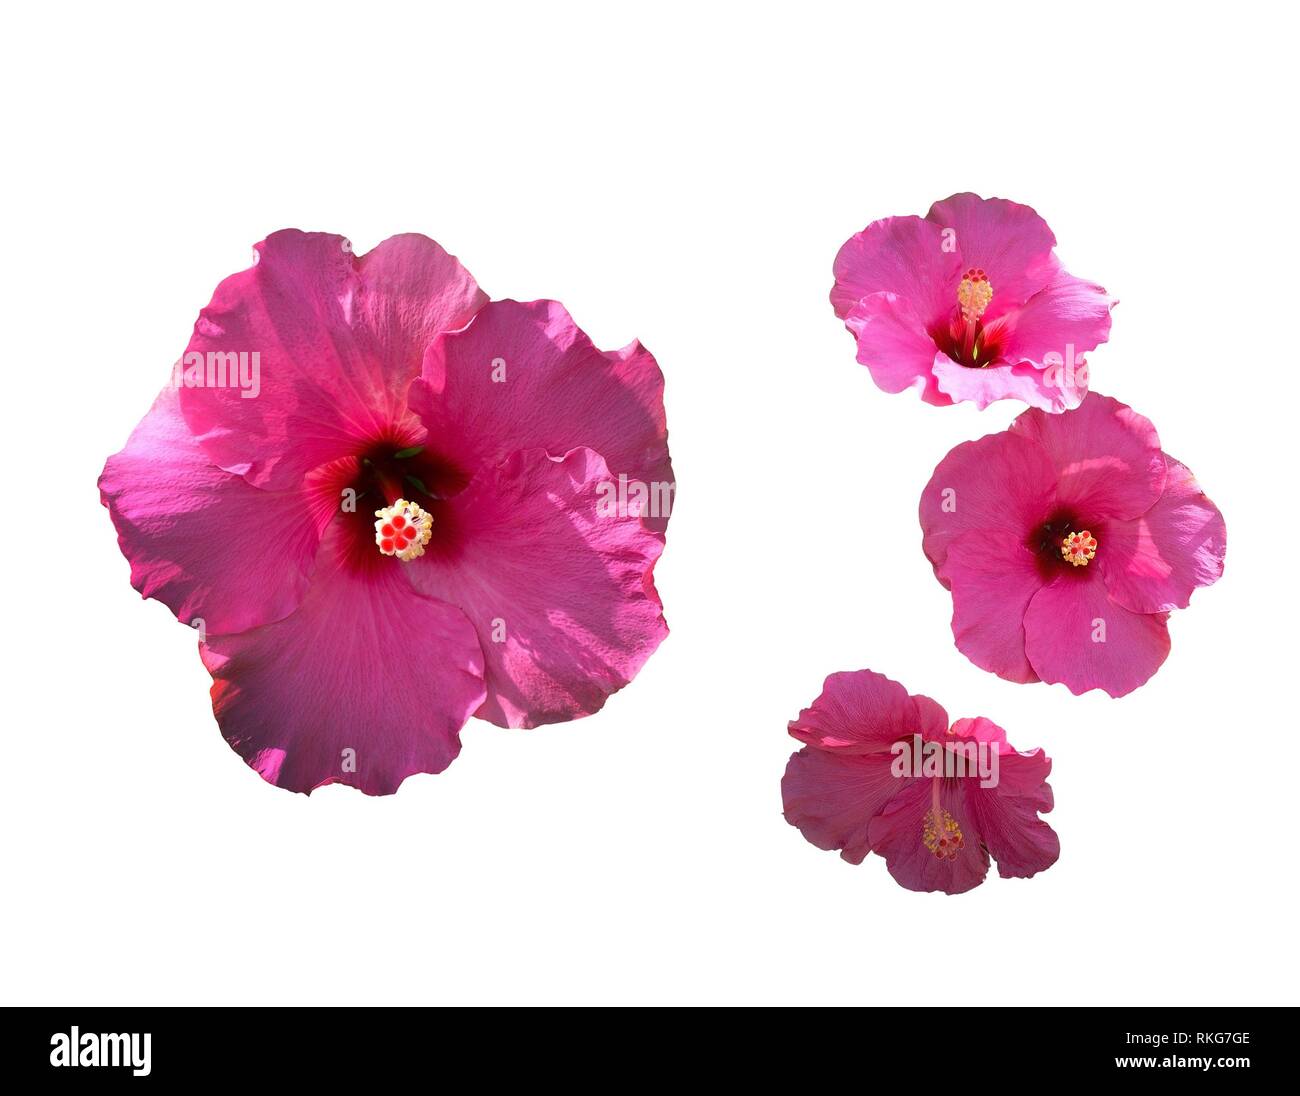 Hibiscus flower Cut Out Stock Images & Pictures - Alamy